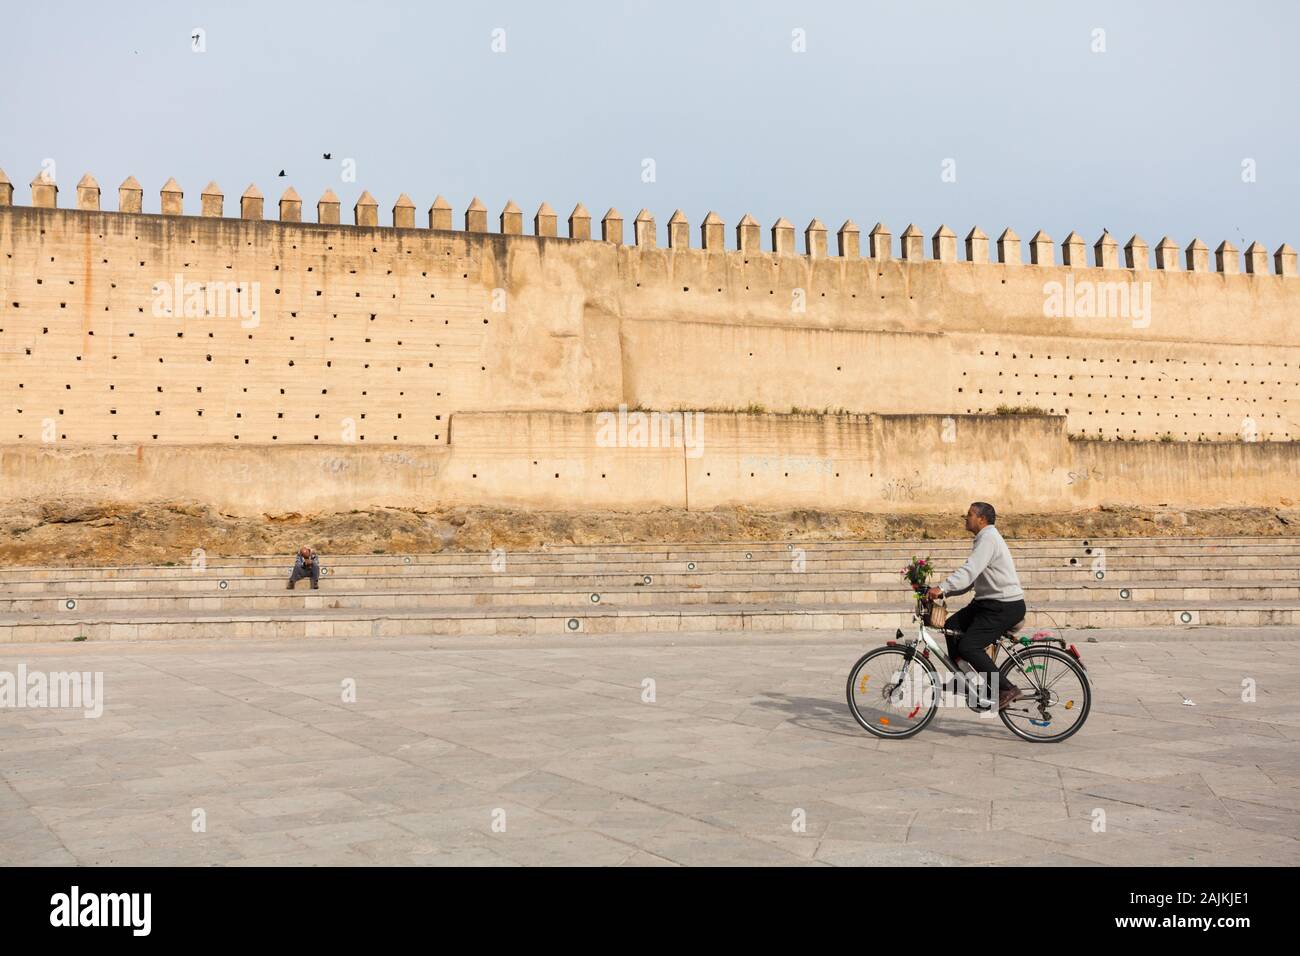 Man with a bunch of flowers riding a bicycle in the scenery of Boujloud Square (Place Boujloud) and the rammed earth city walls of Fes (Fez), Morocco Stock Photo